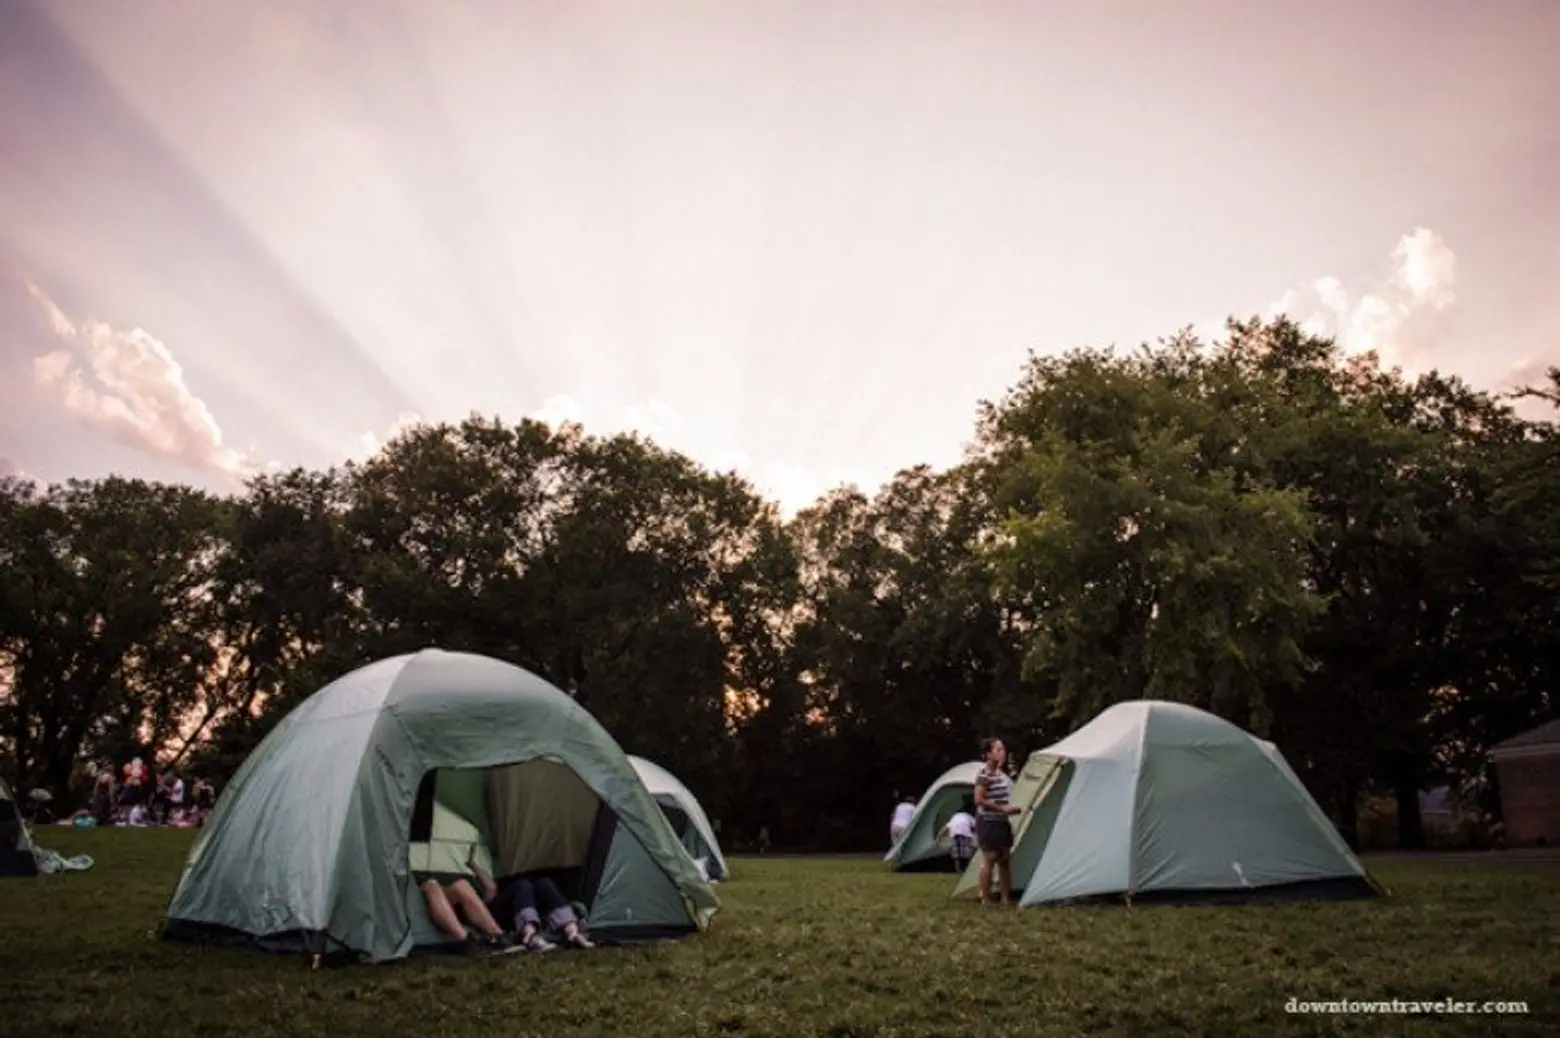 Camp out in Central Park for free next weekend